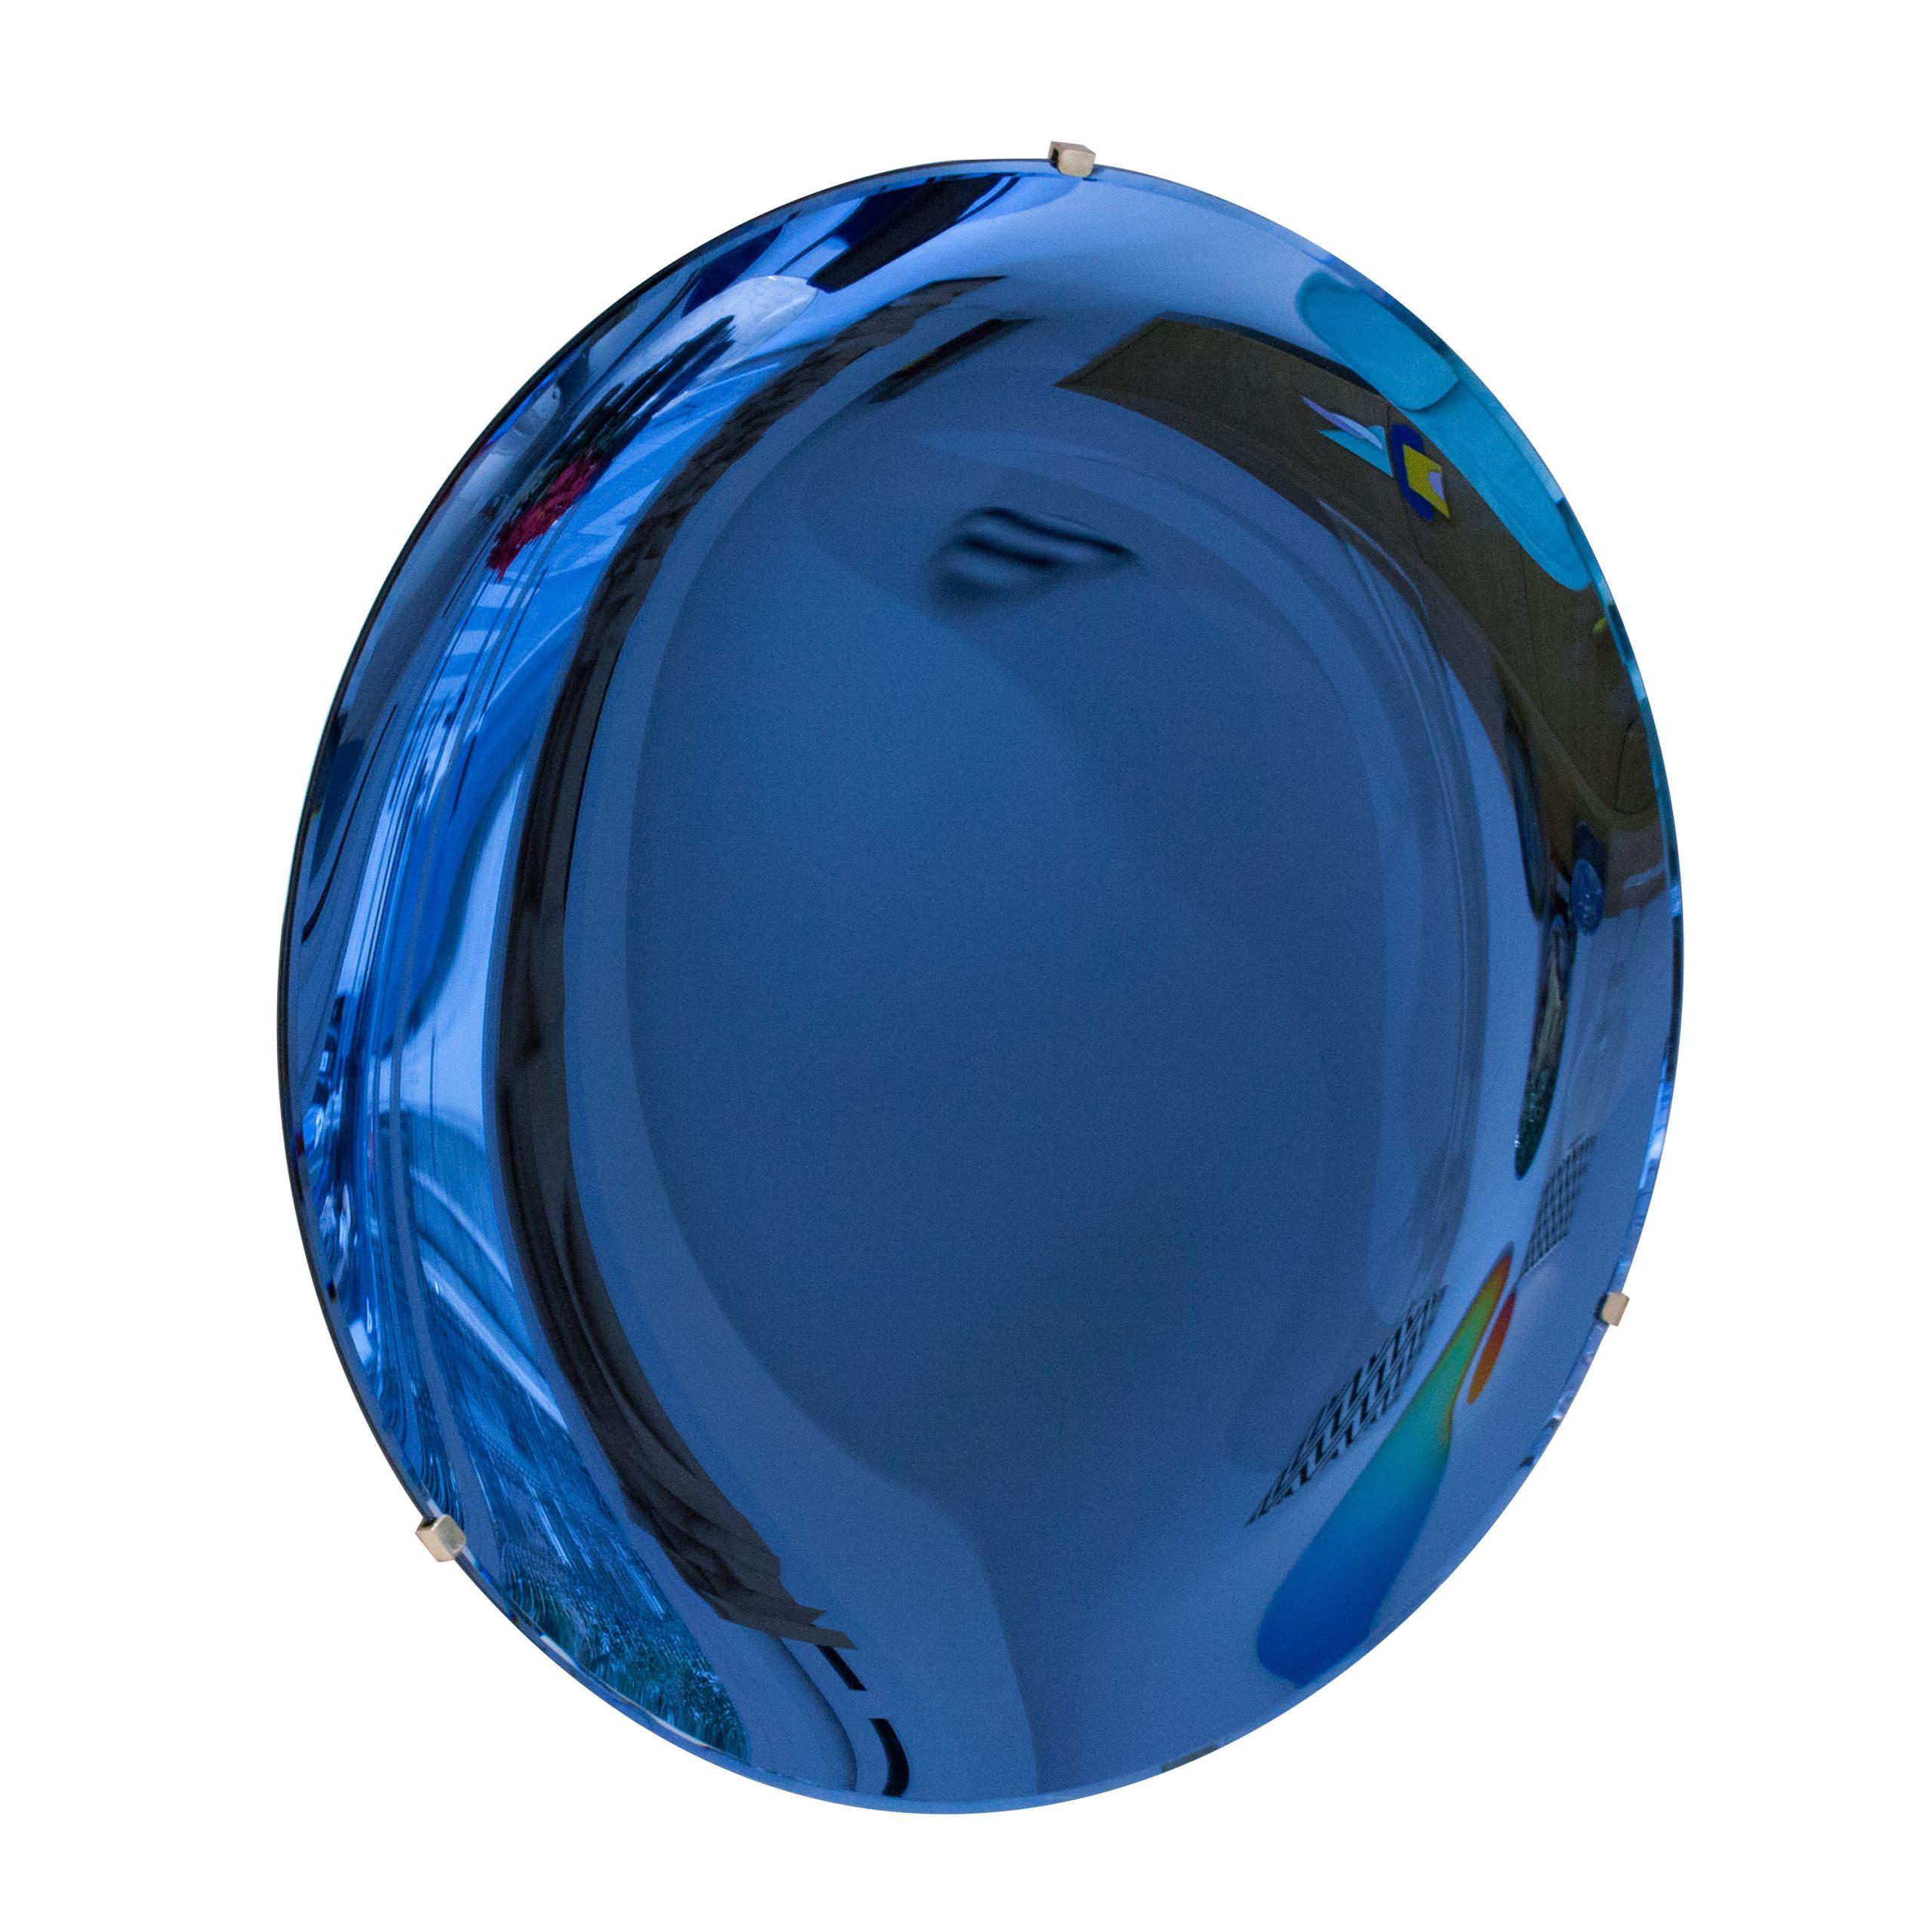 Hand-crafted blue Murano glass concave mirror with bevel edge and brass back structure for hanging on the wall.